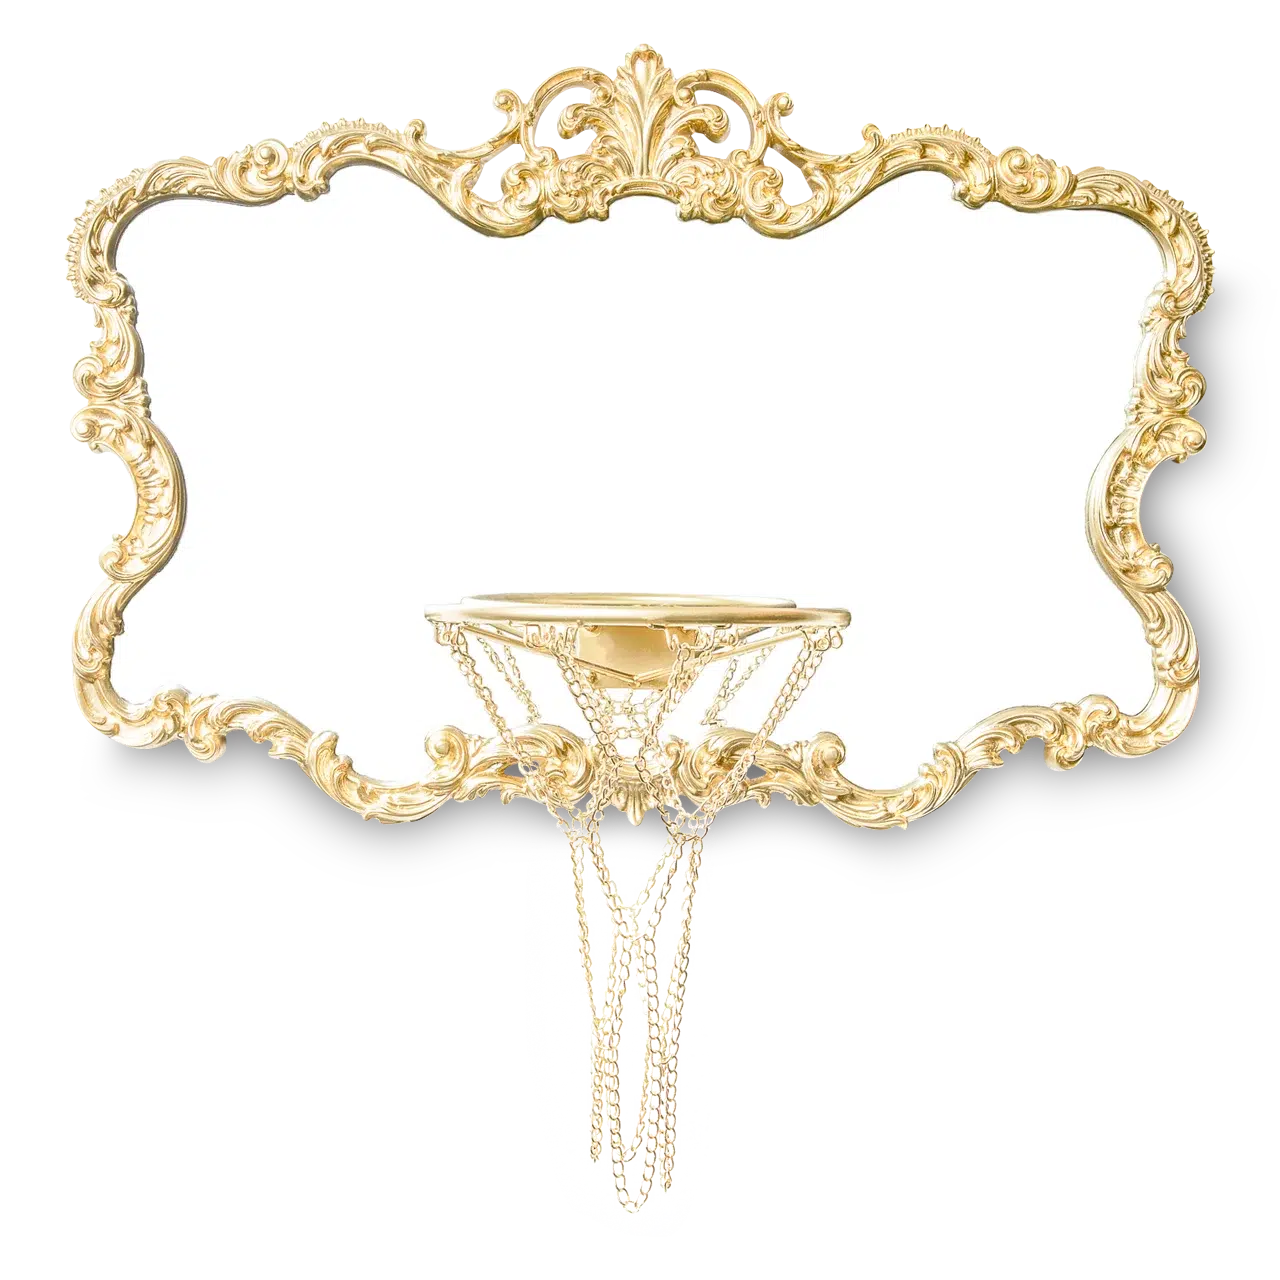 An ornate frame with a gold mirror hoop design.